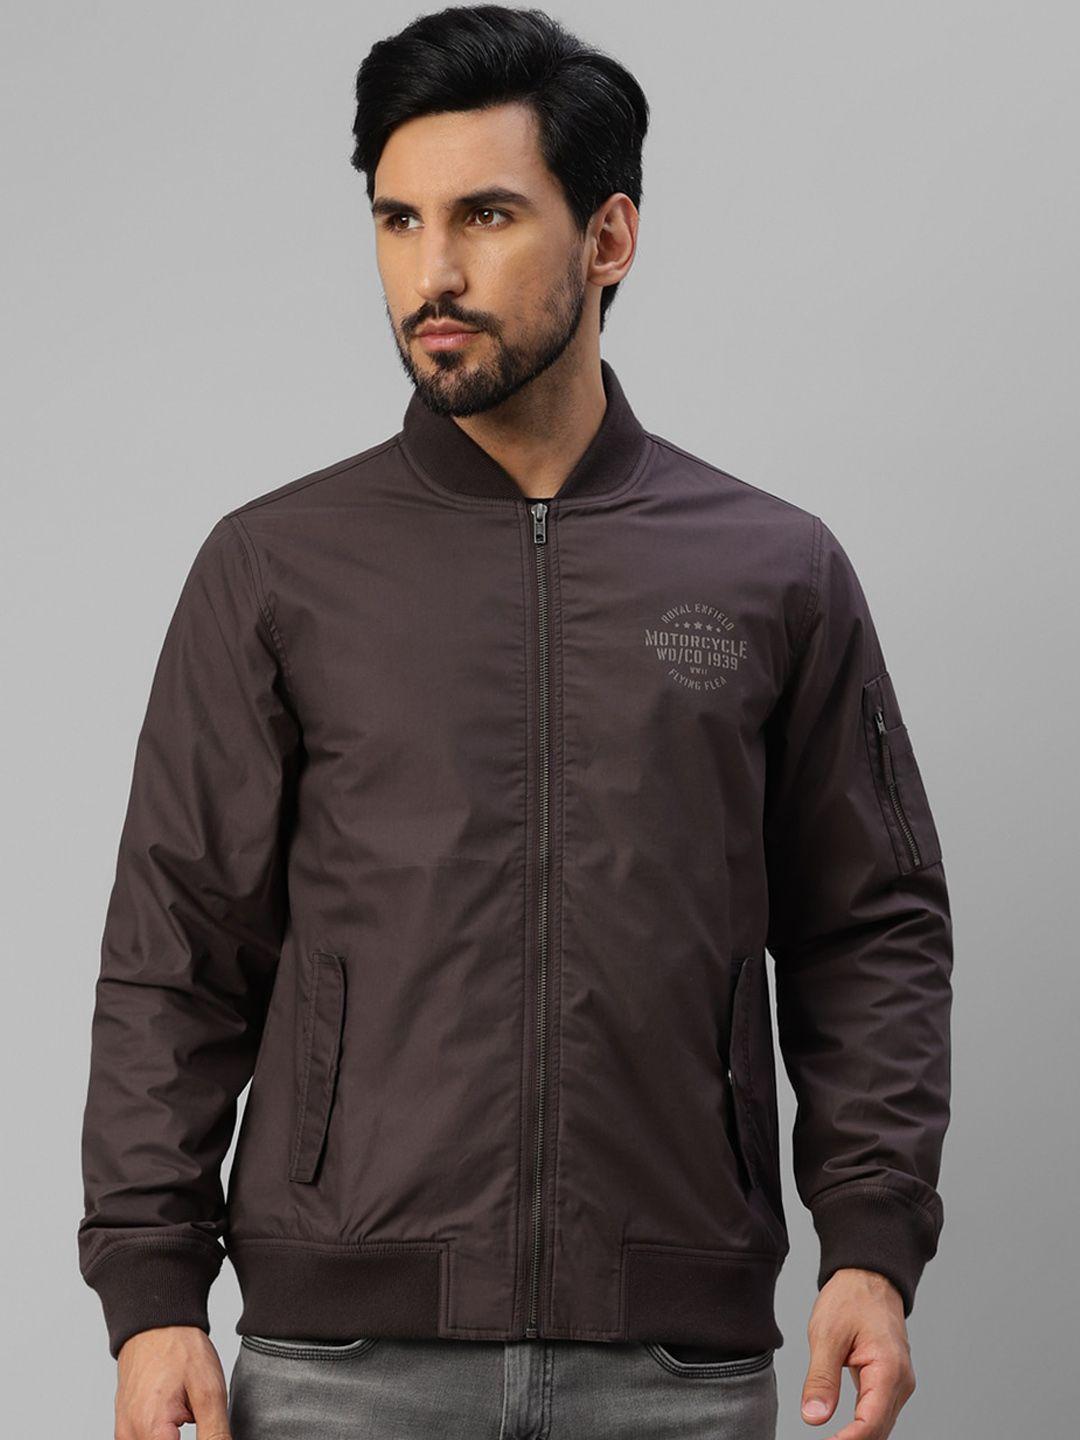 royal enfield stand collar bomber jacket